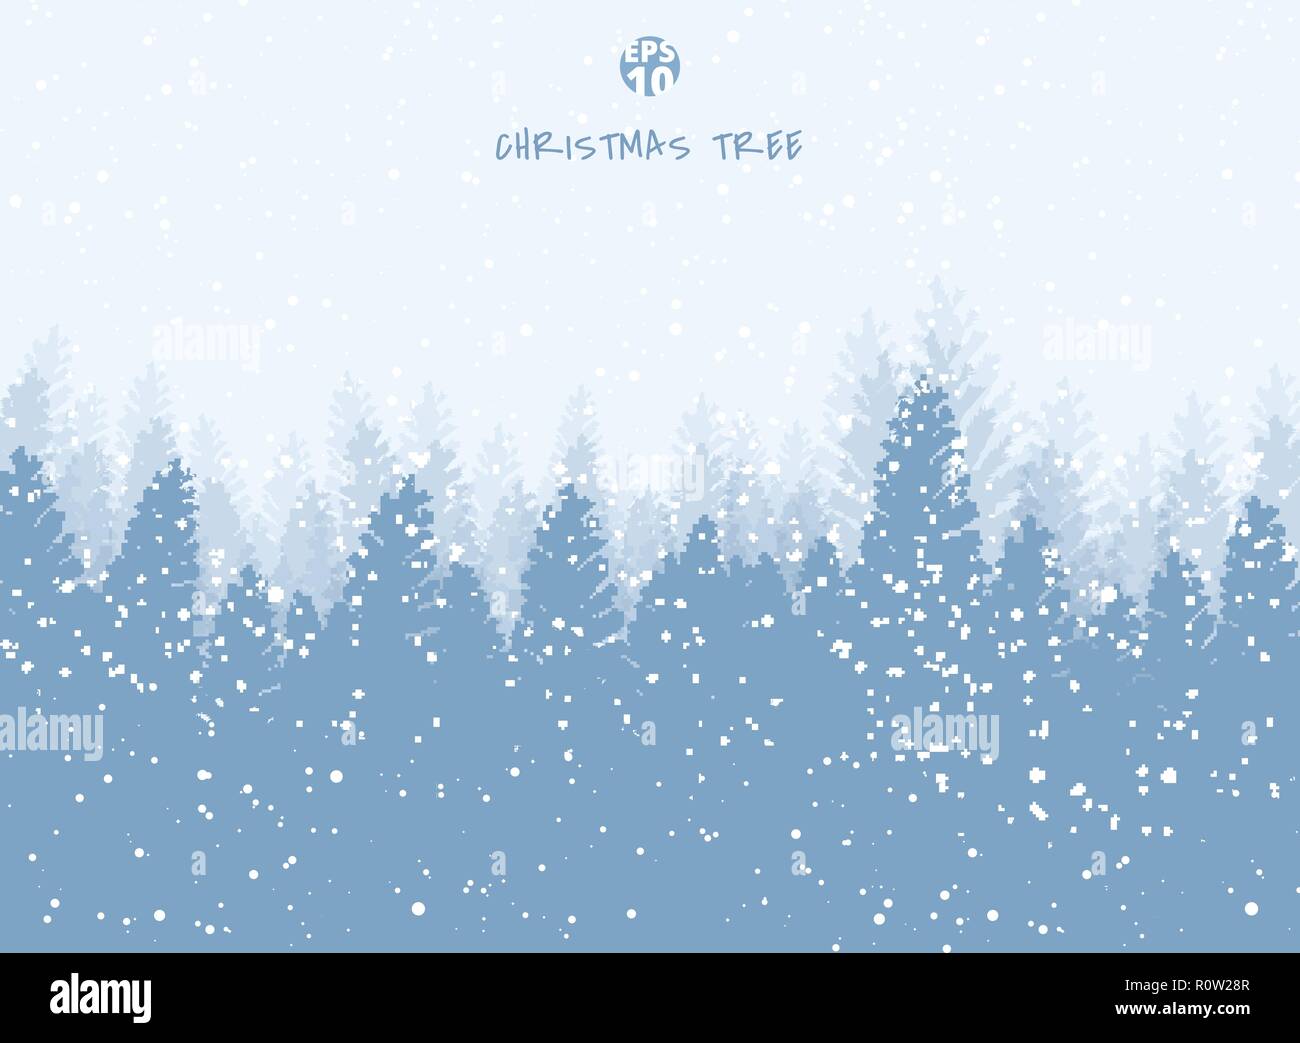 Winter landscape christmas holiday trees against the blue sky with snow horizontal background. Vector illustration Stock Vector